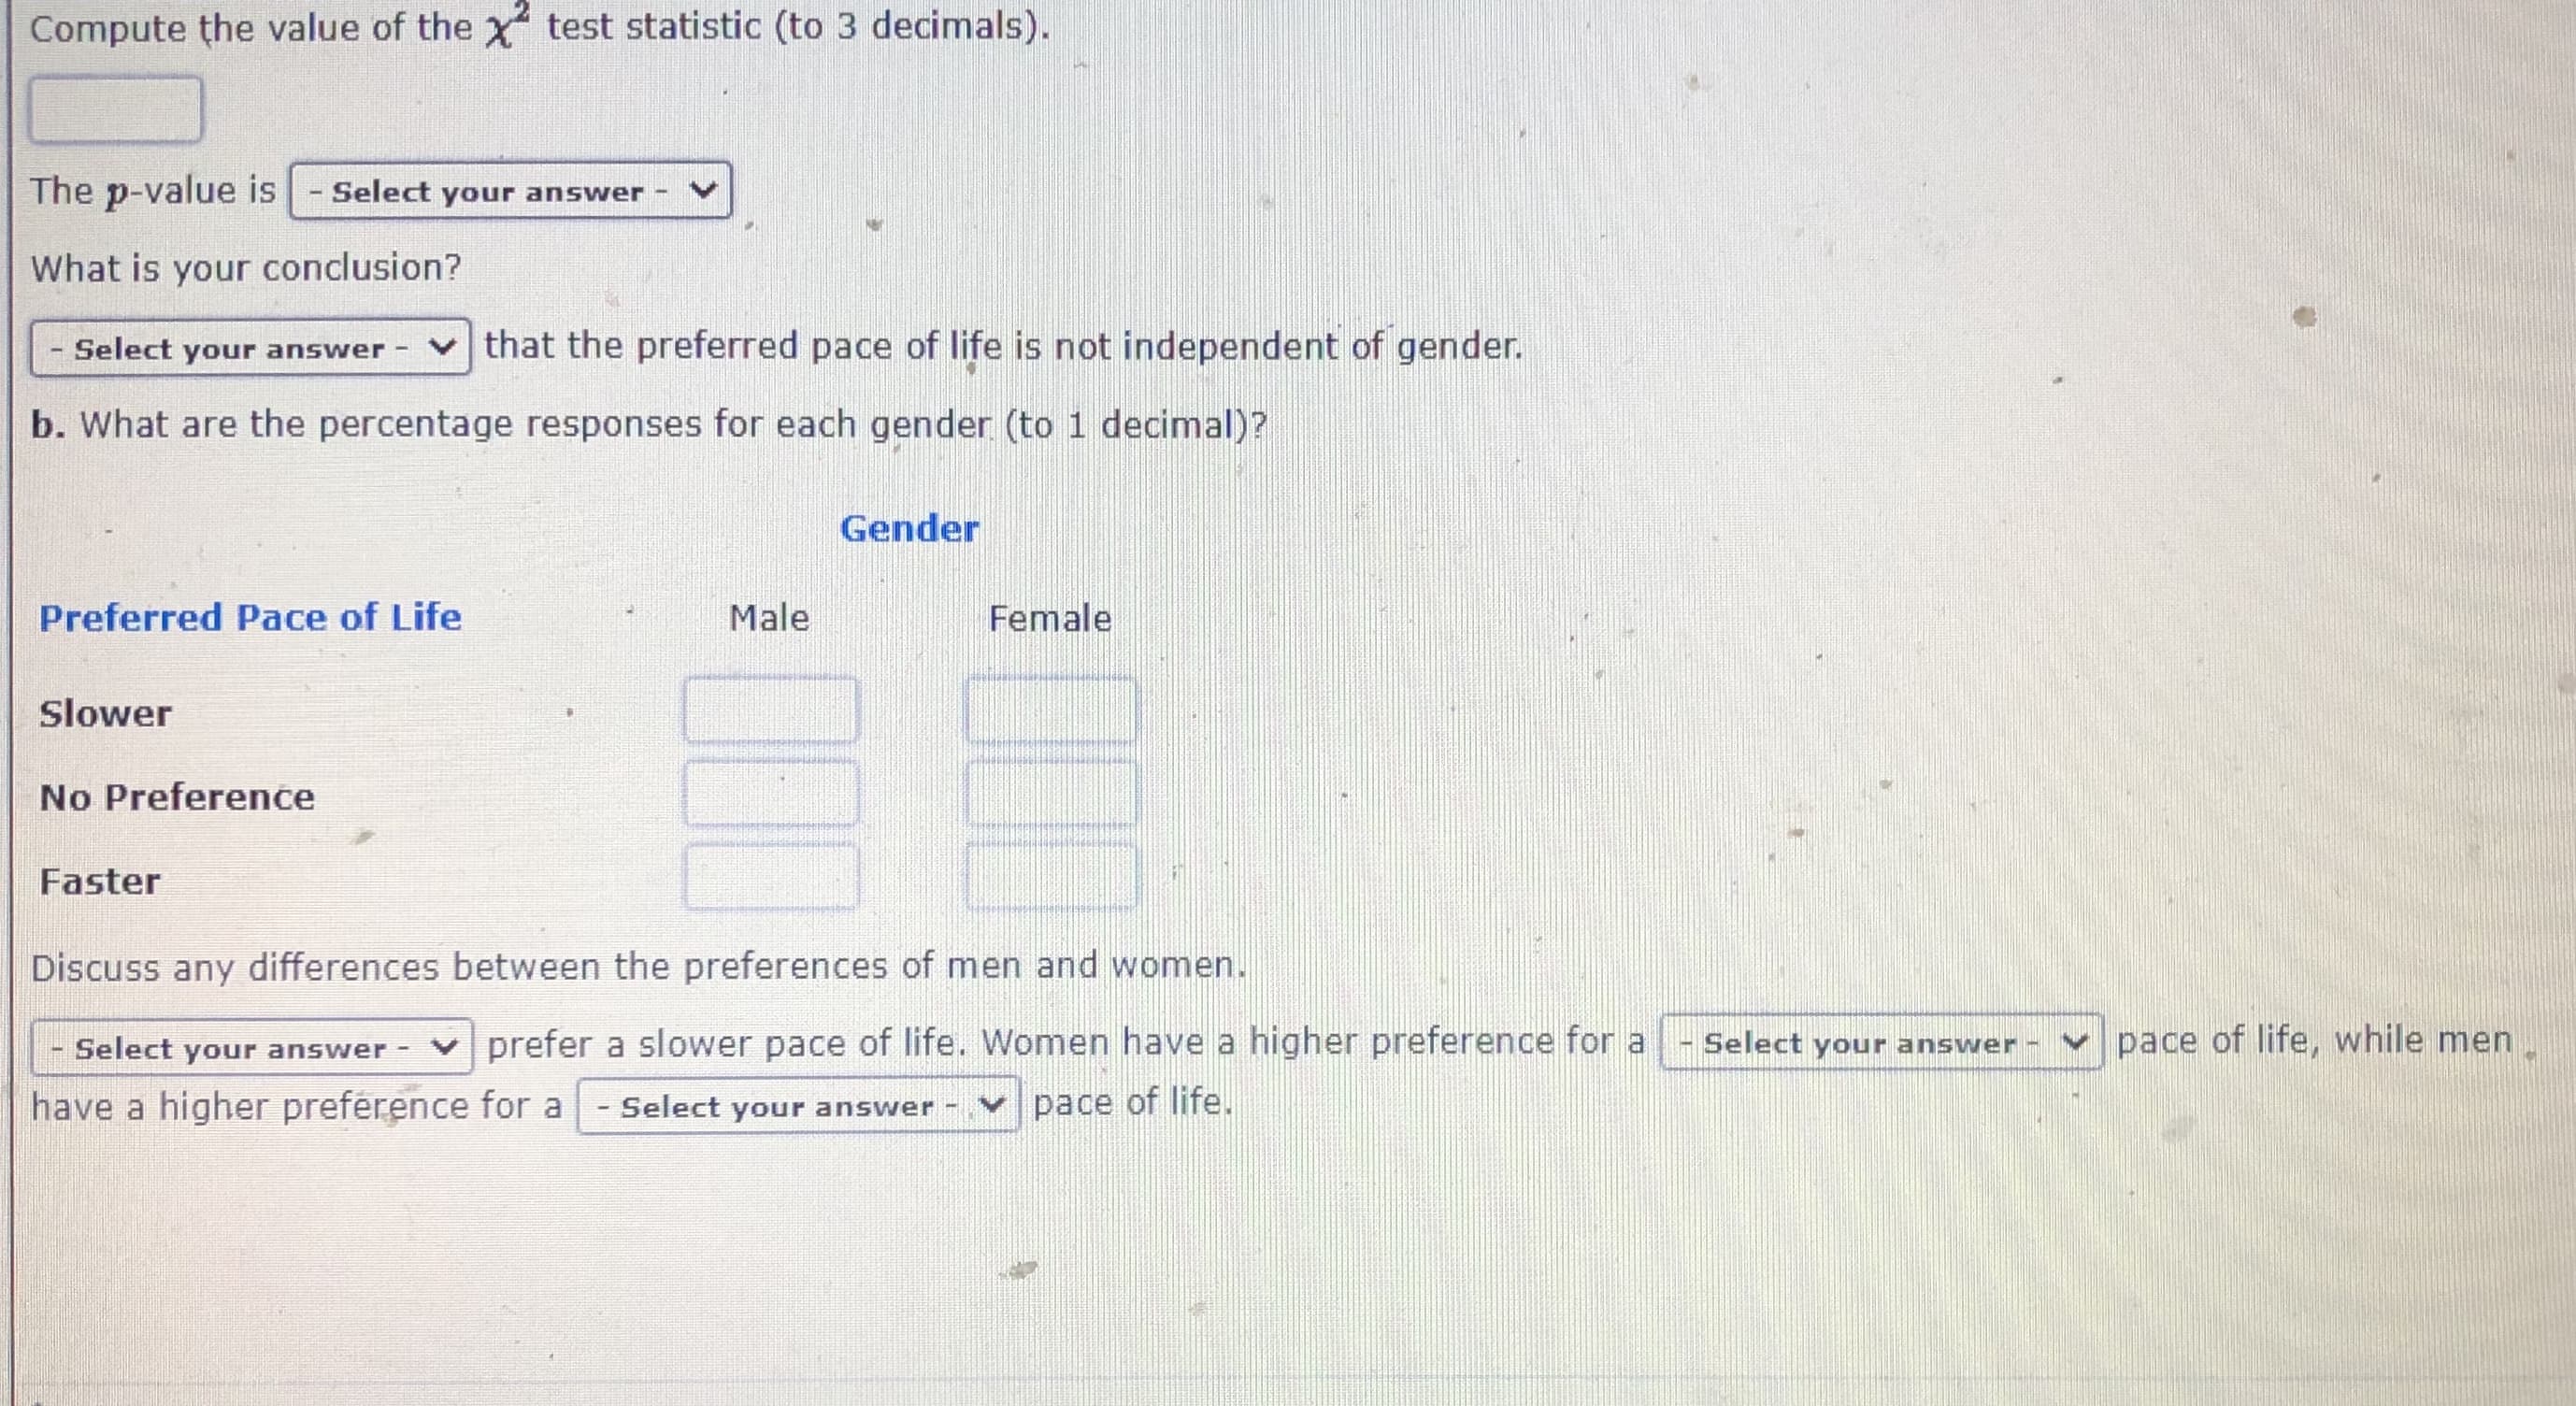 b. What are the percentage responses for each gender (to 1 decimal)?
Gender
Preferred Pace of Life
Male
Female
Slower
No Preference
Faster
Discuss any differences between the preferences of men and women.
Select your answer
prefer a slower pace of life. Women have a higher preference for a
Select your answer
v pace of life, while men
have a higher preference for a - Select your answer -
V pace of life.
